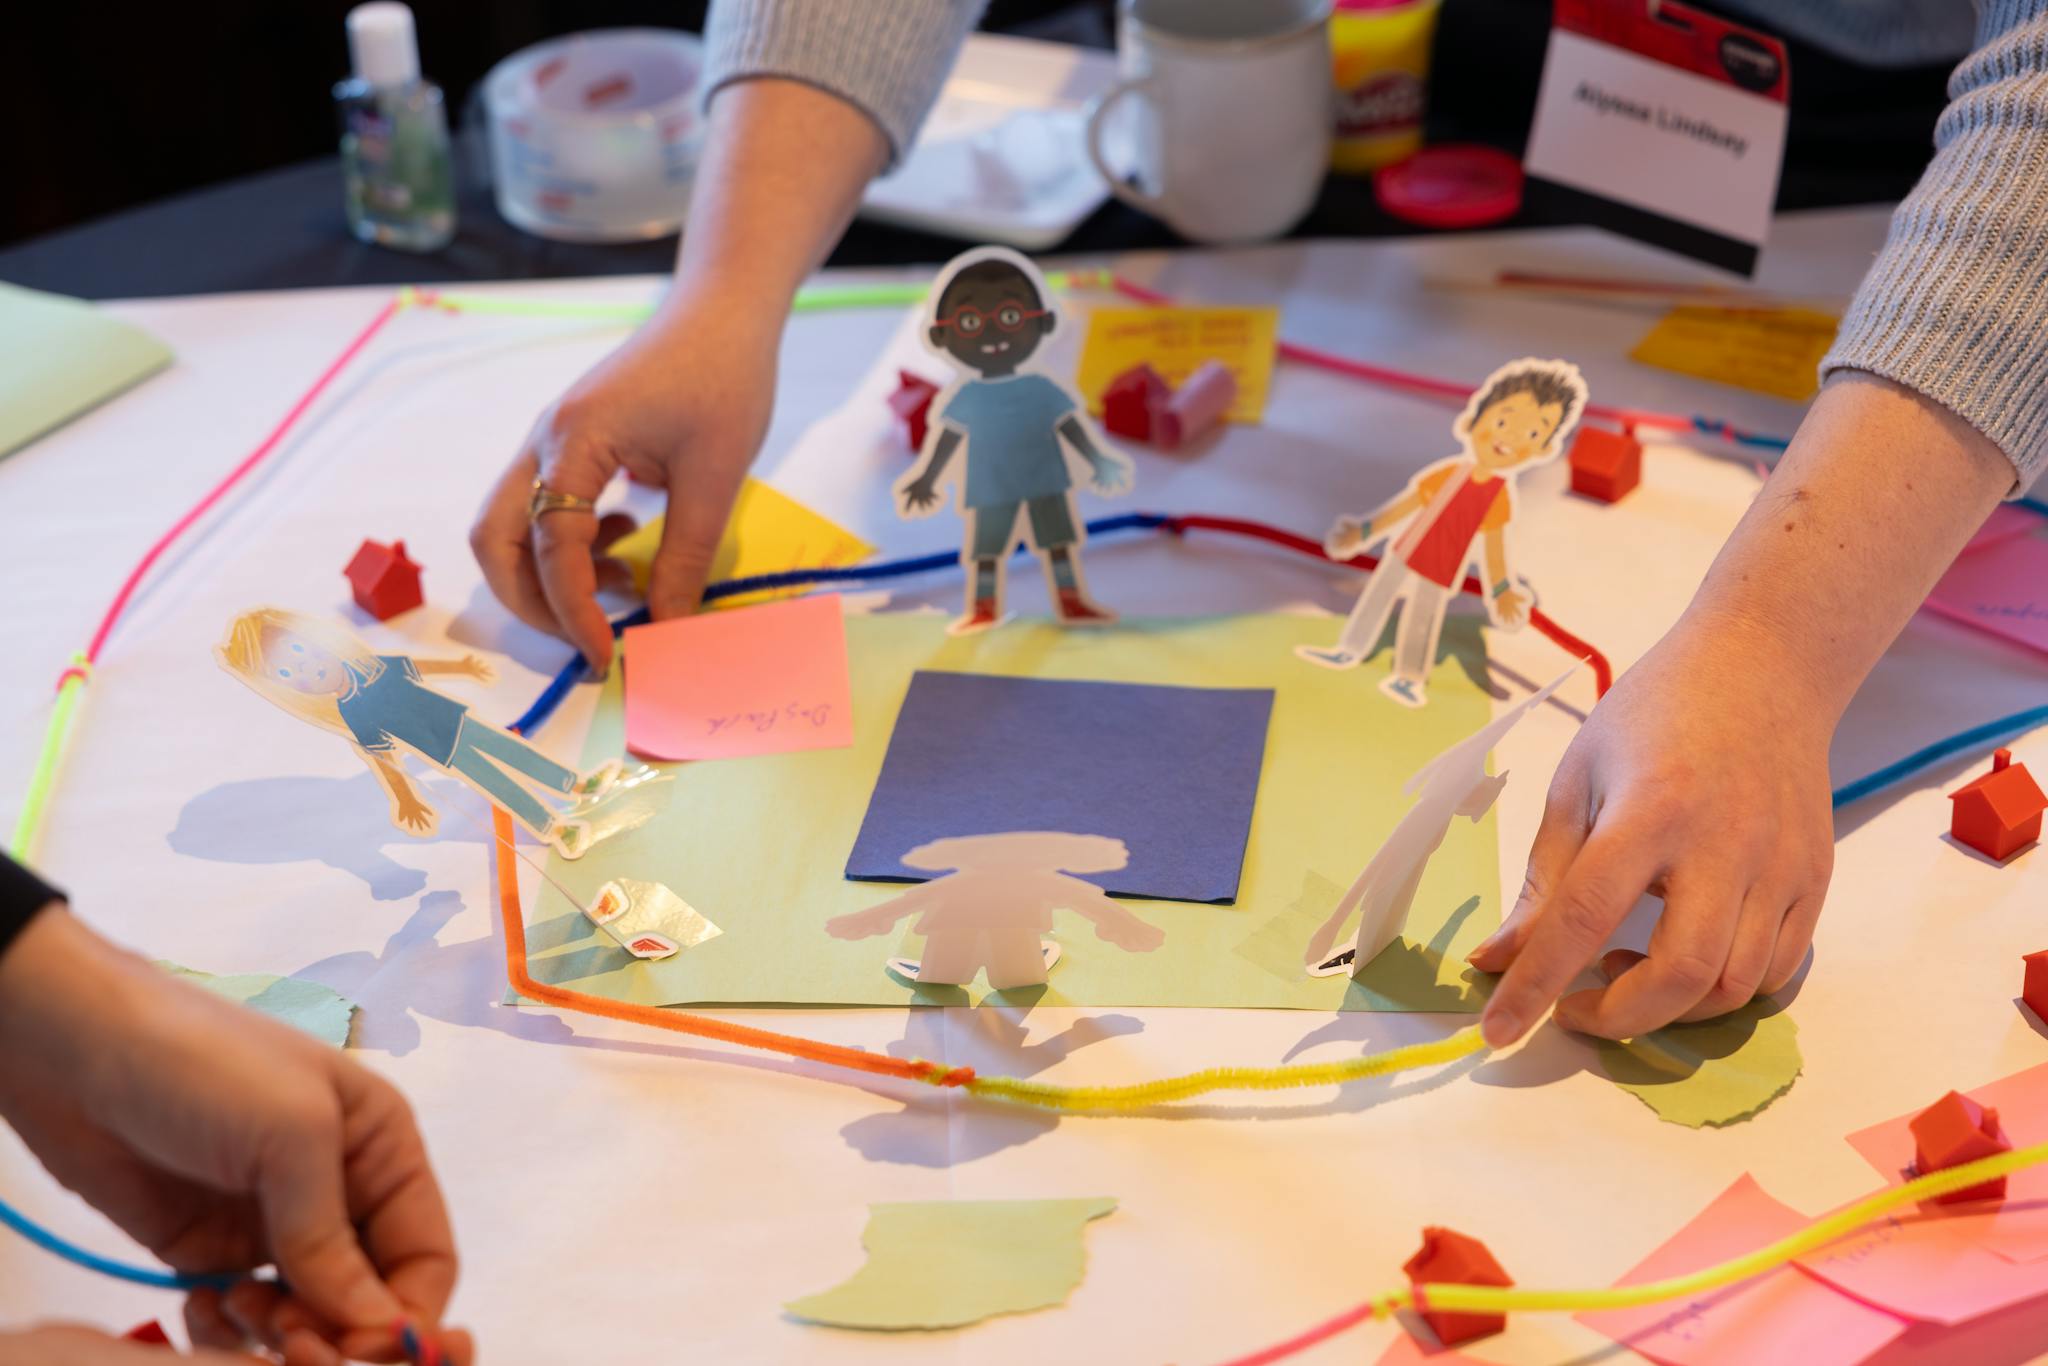 A diagram of a city made from pipe cleaners, pictures of people, and craft paper